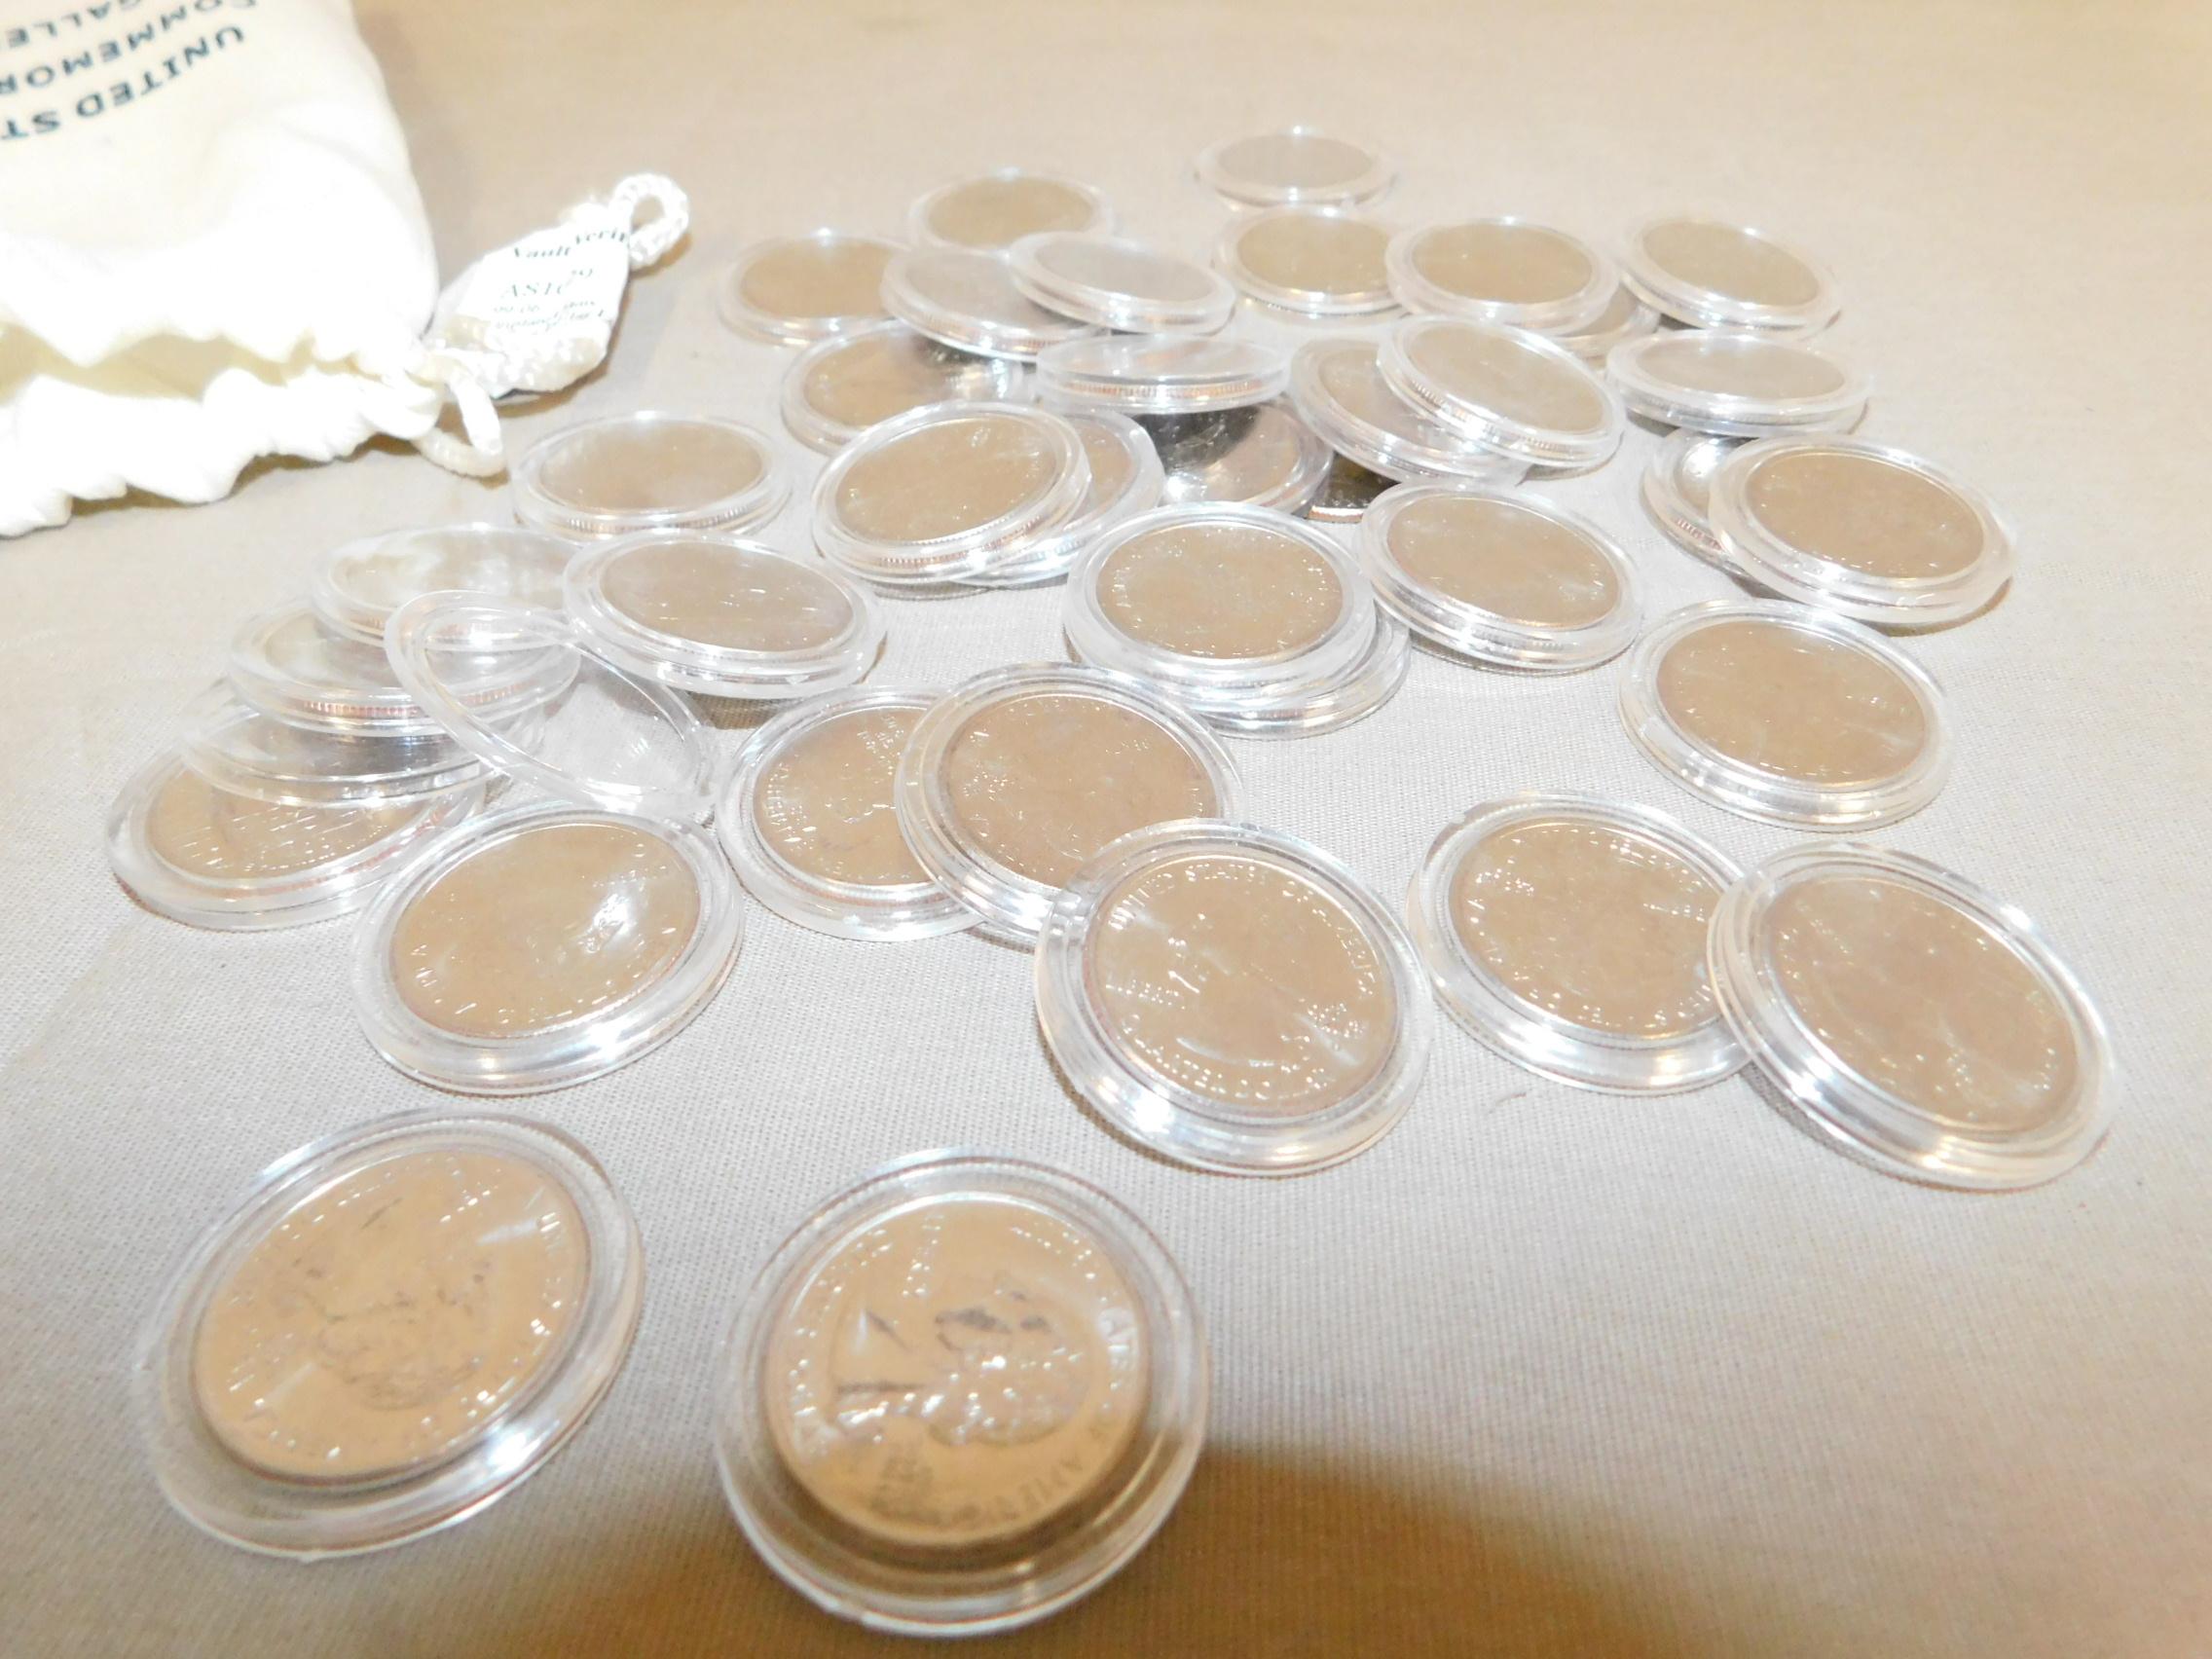 BAG OF 37 UNPLATED STATE QUARTERS